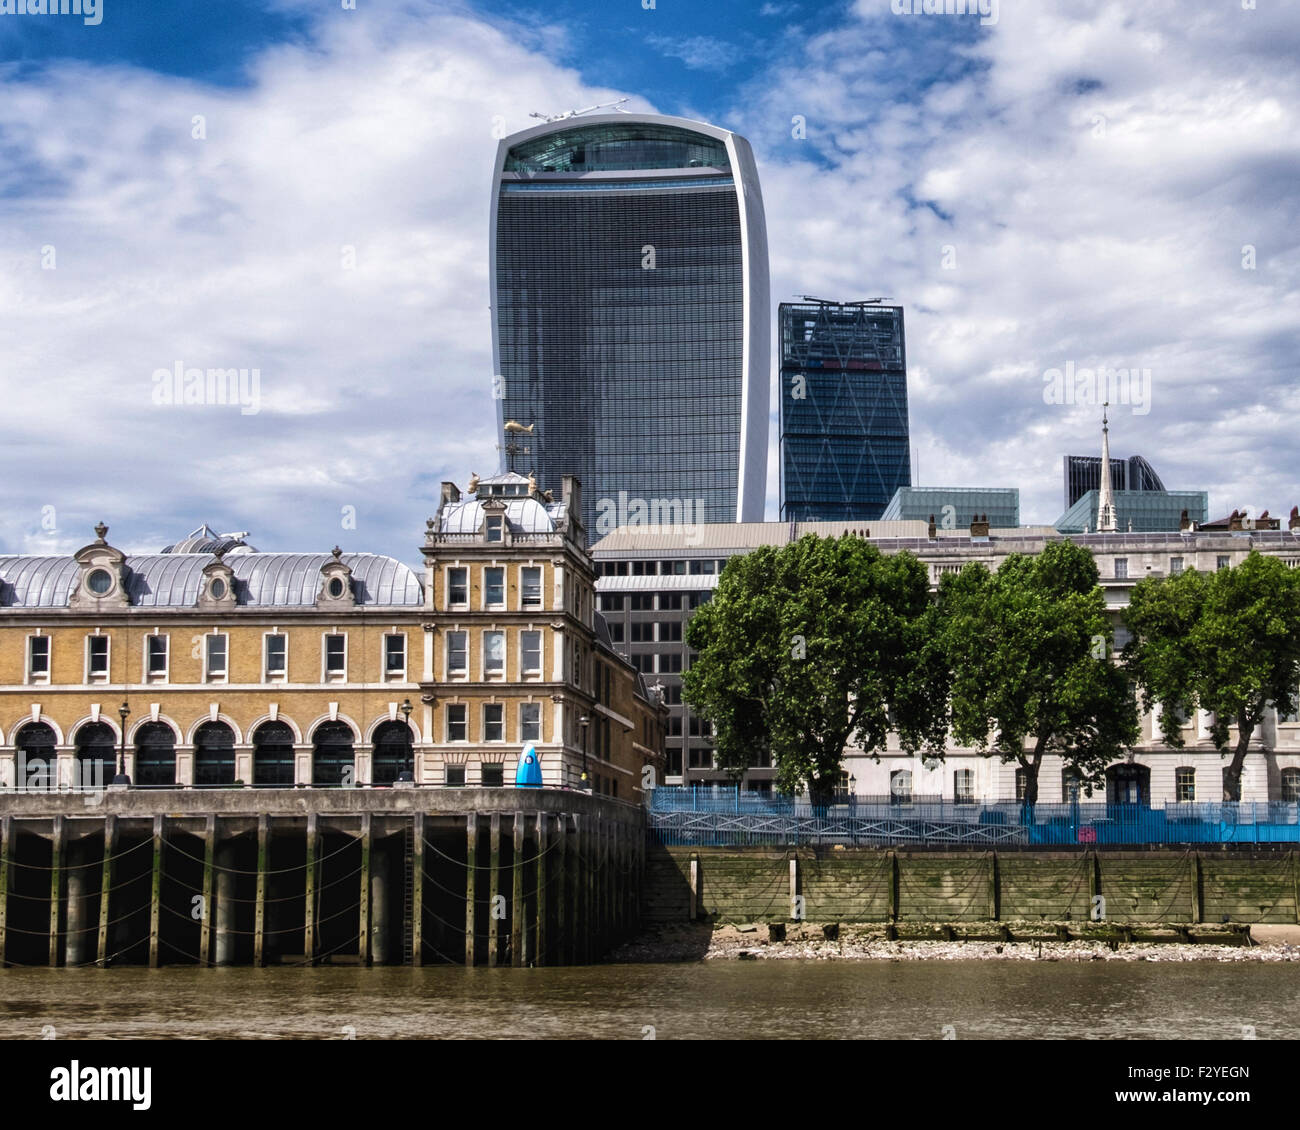 London, Old and New architecture, Controversial 'Walkie Talkie' Skyscraper and riverside buildings Stock Photo